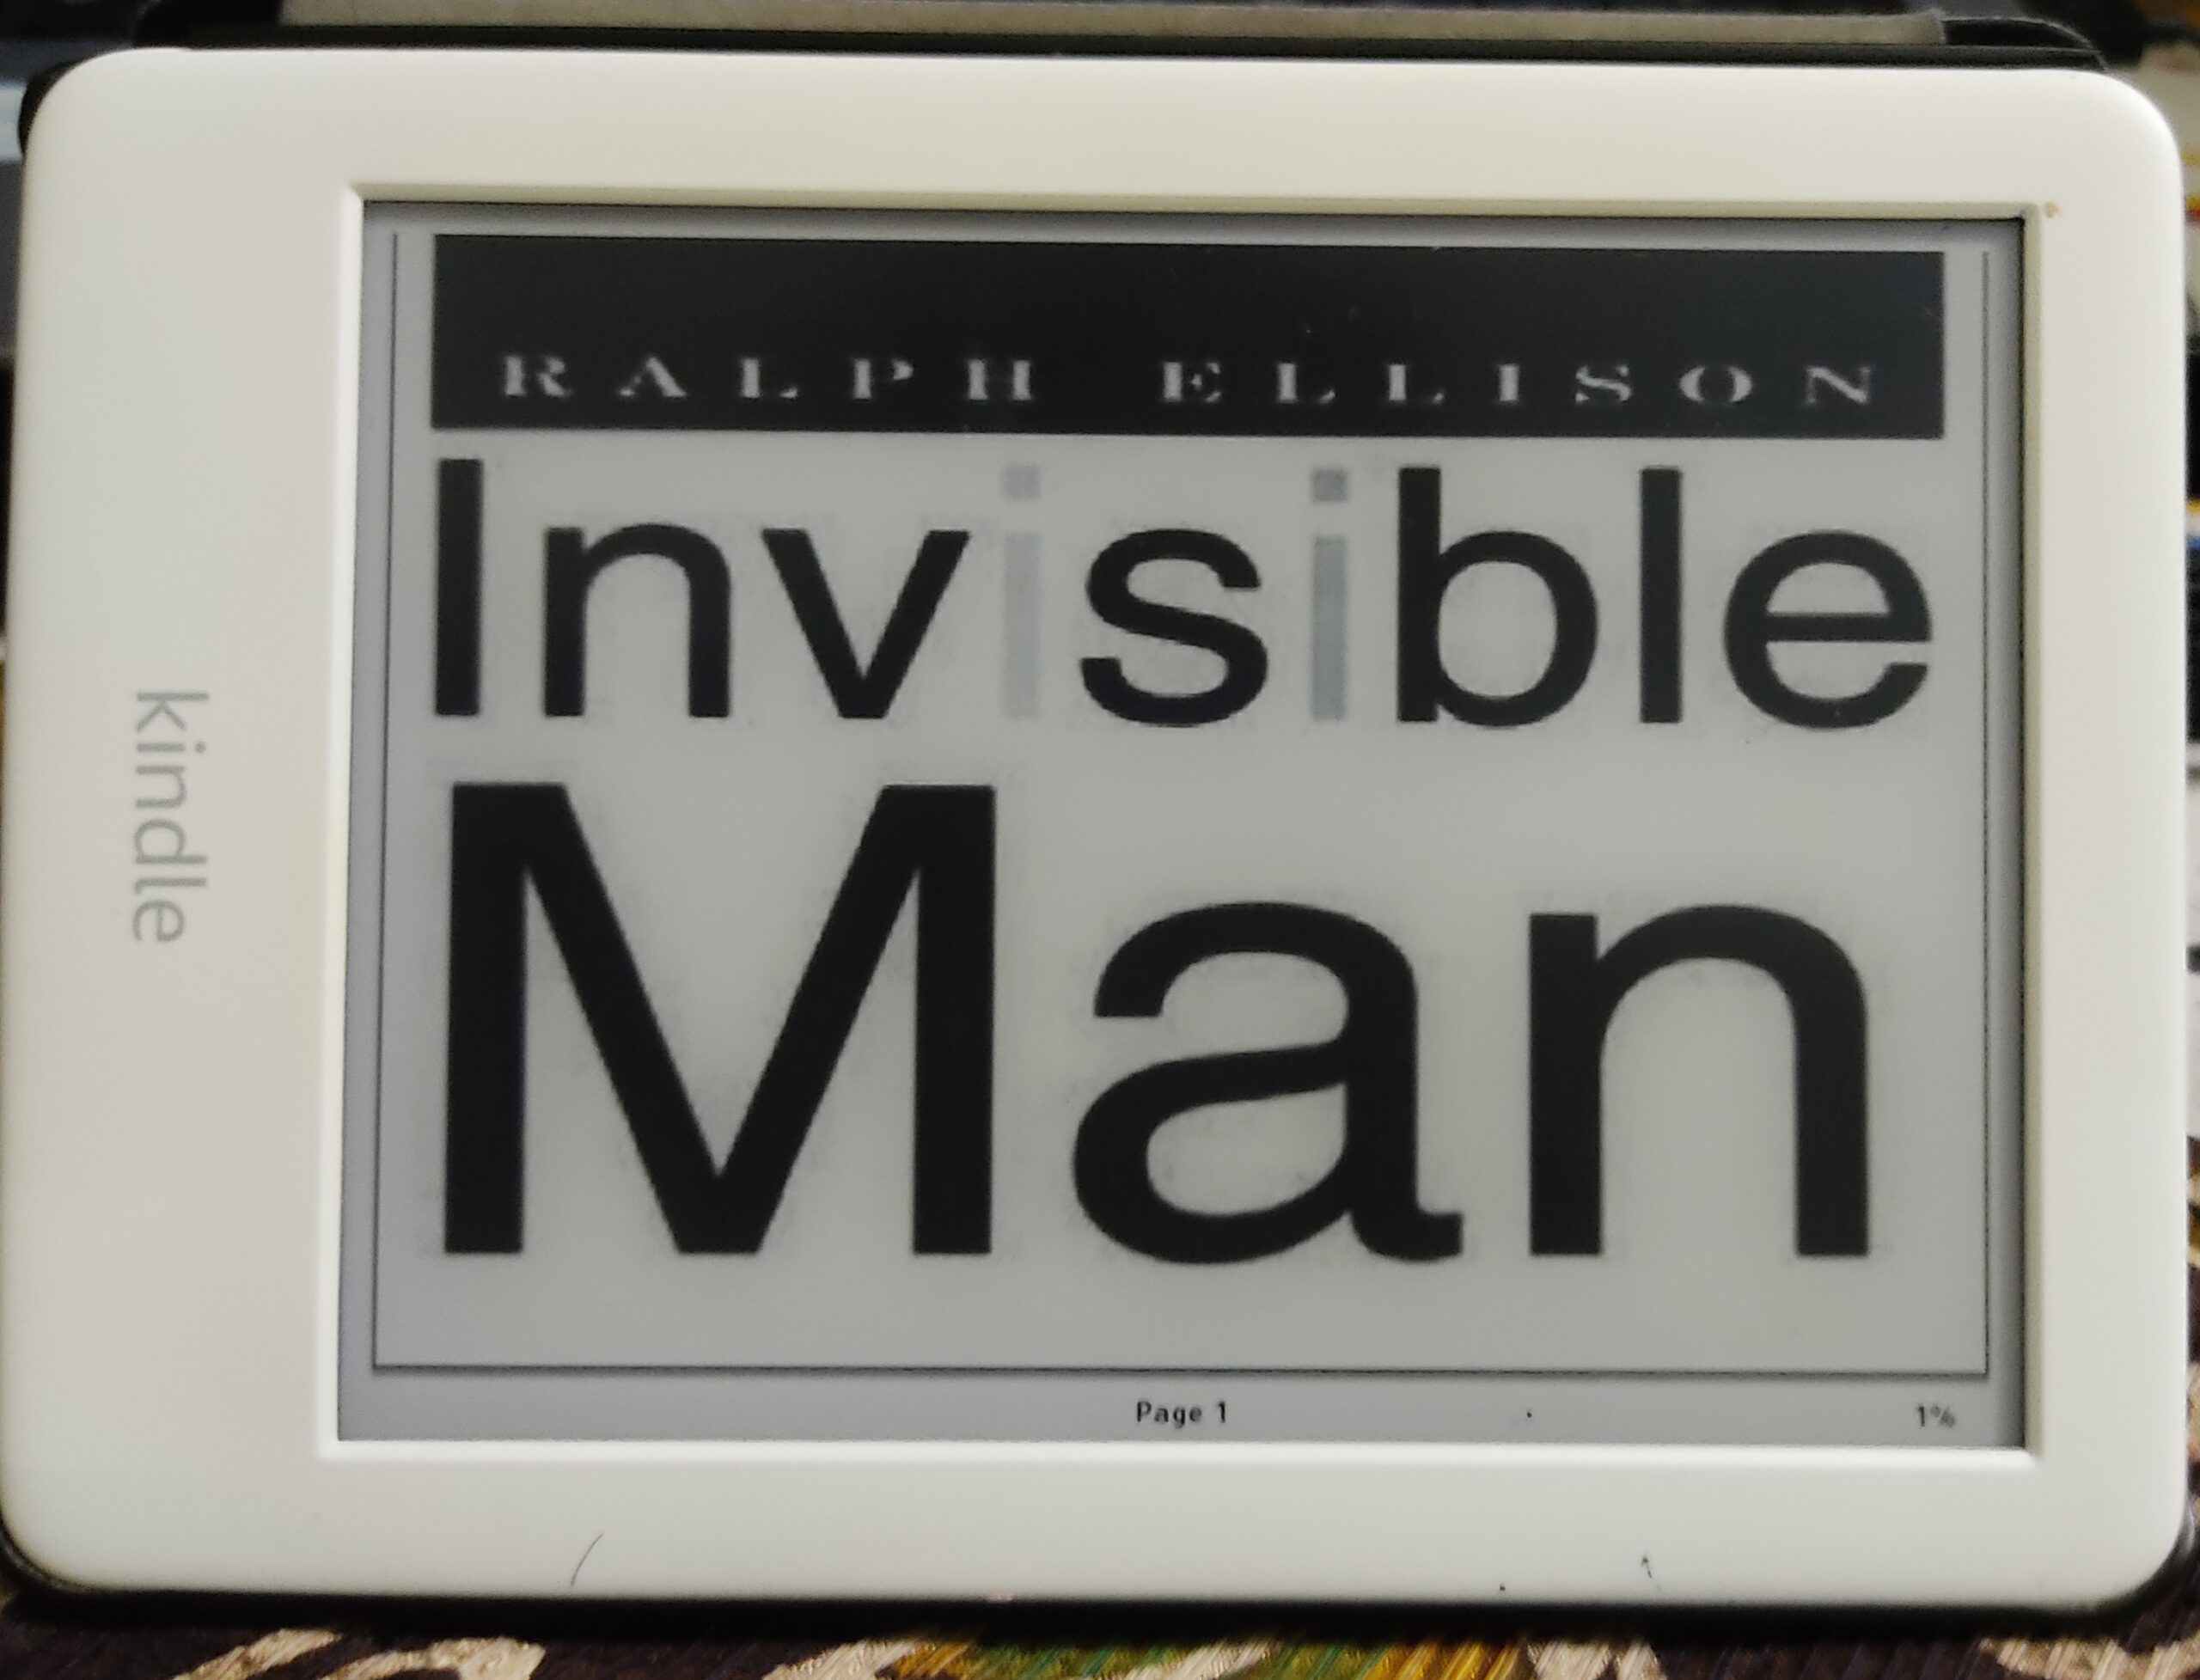 book review of invisible man by ralph ellison